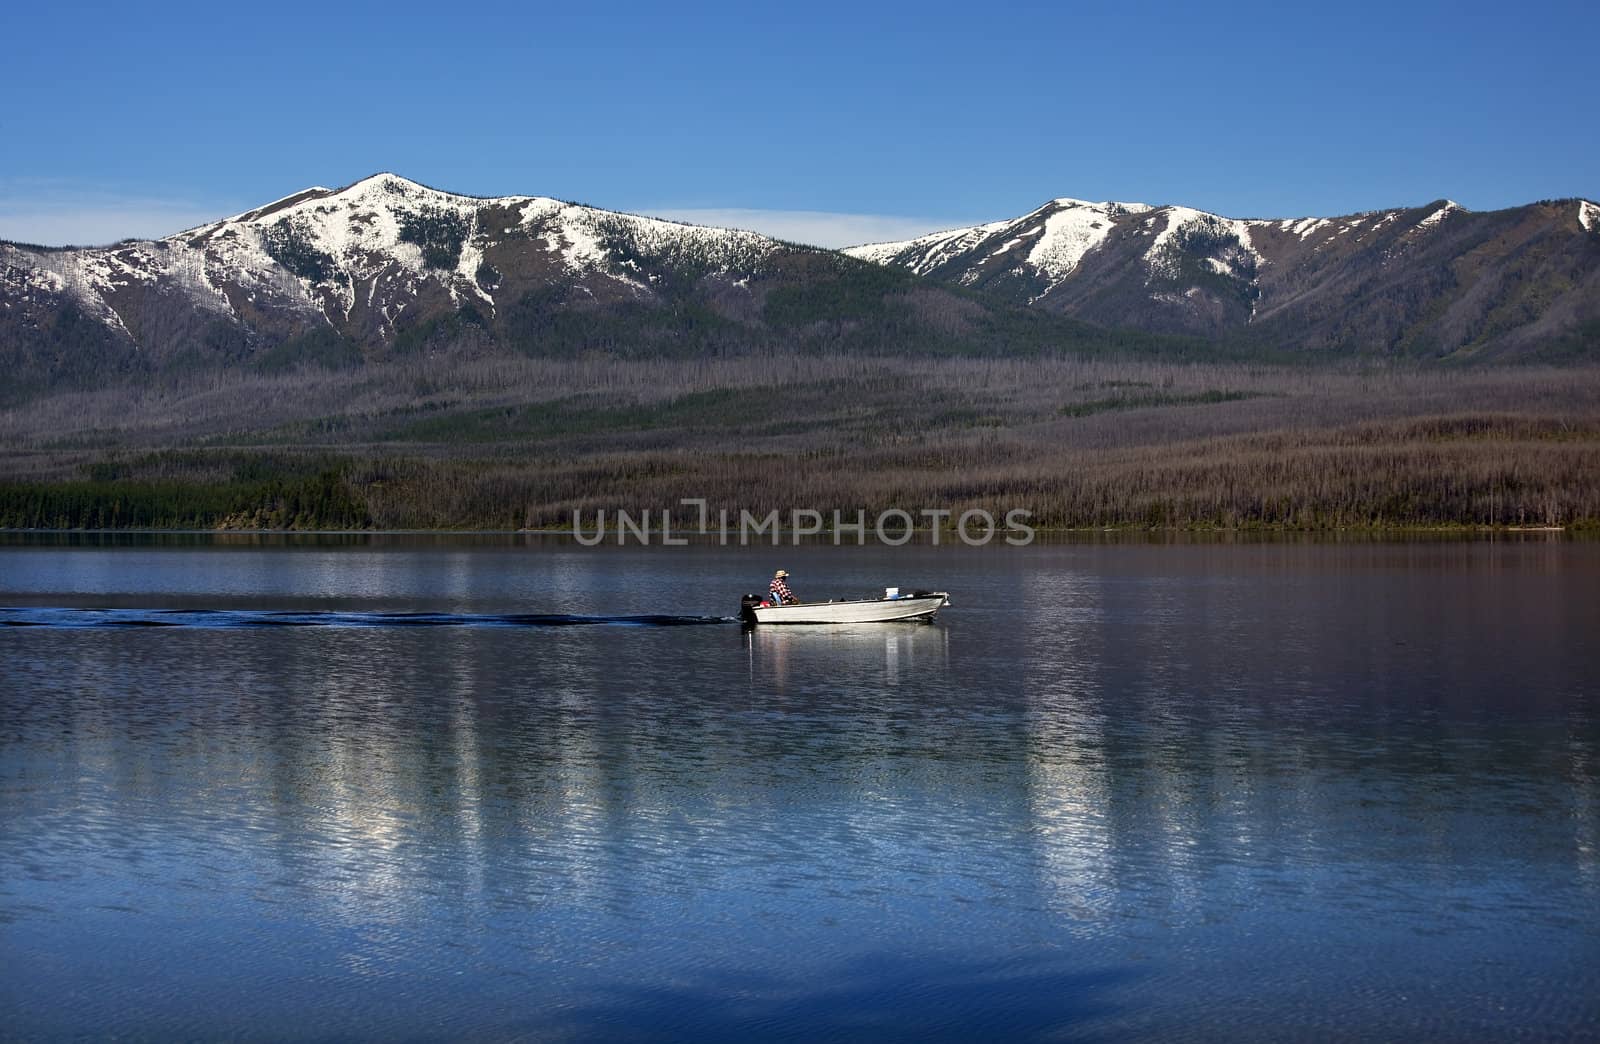 Lake McDonald Going Fishing Outboard in front of Snow Mountains Glacier National Park Montana